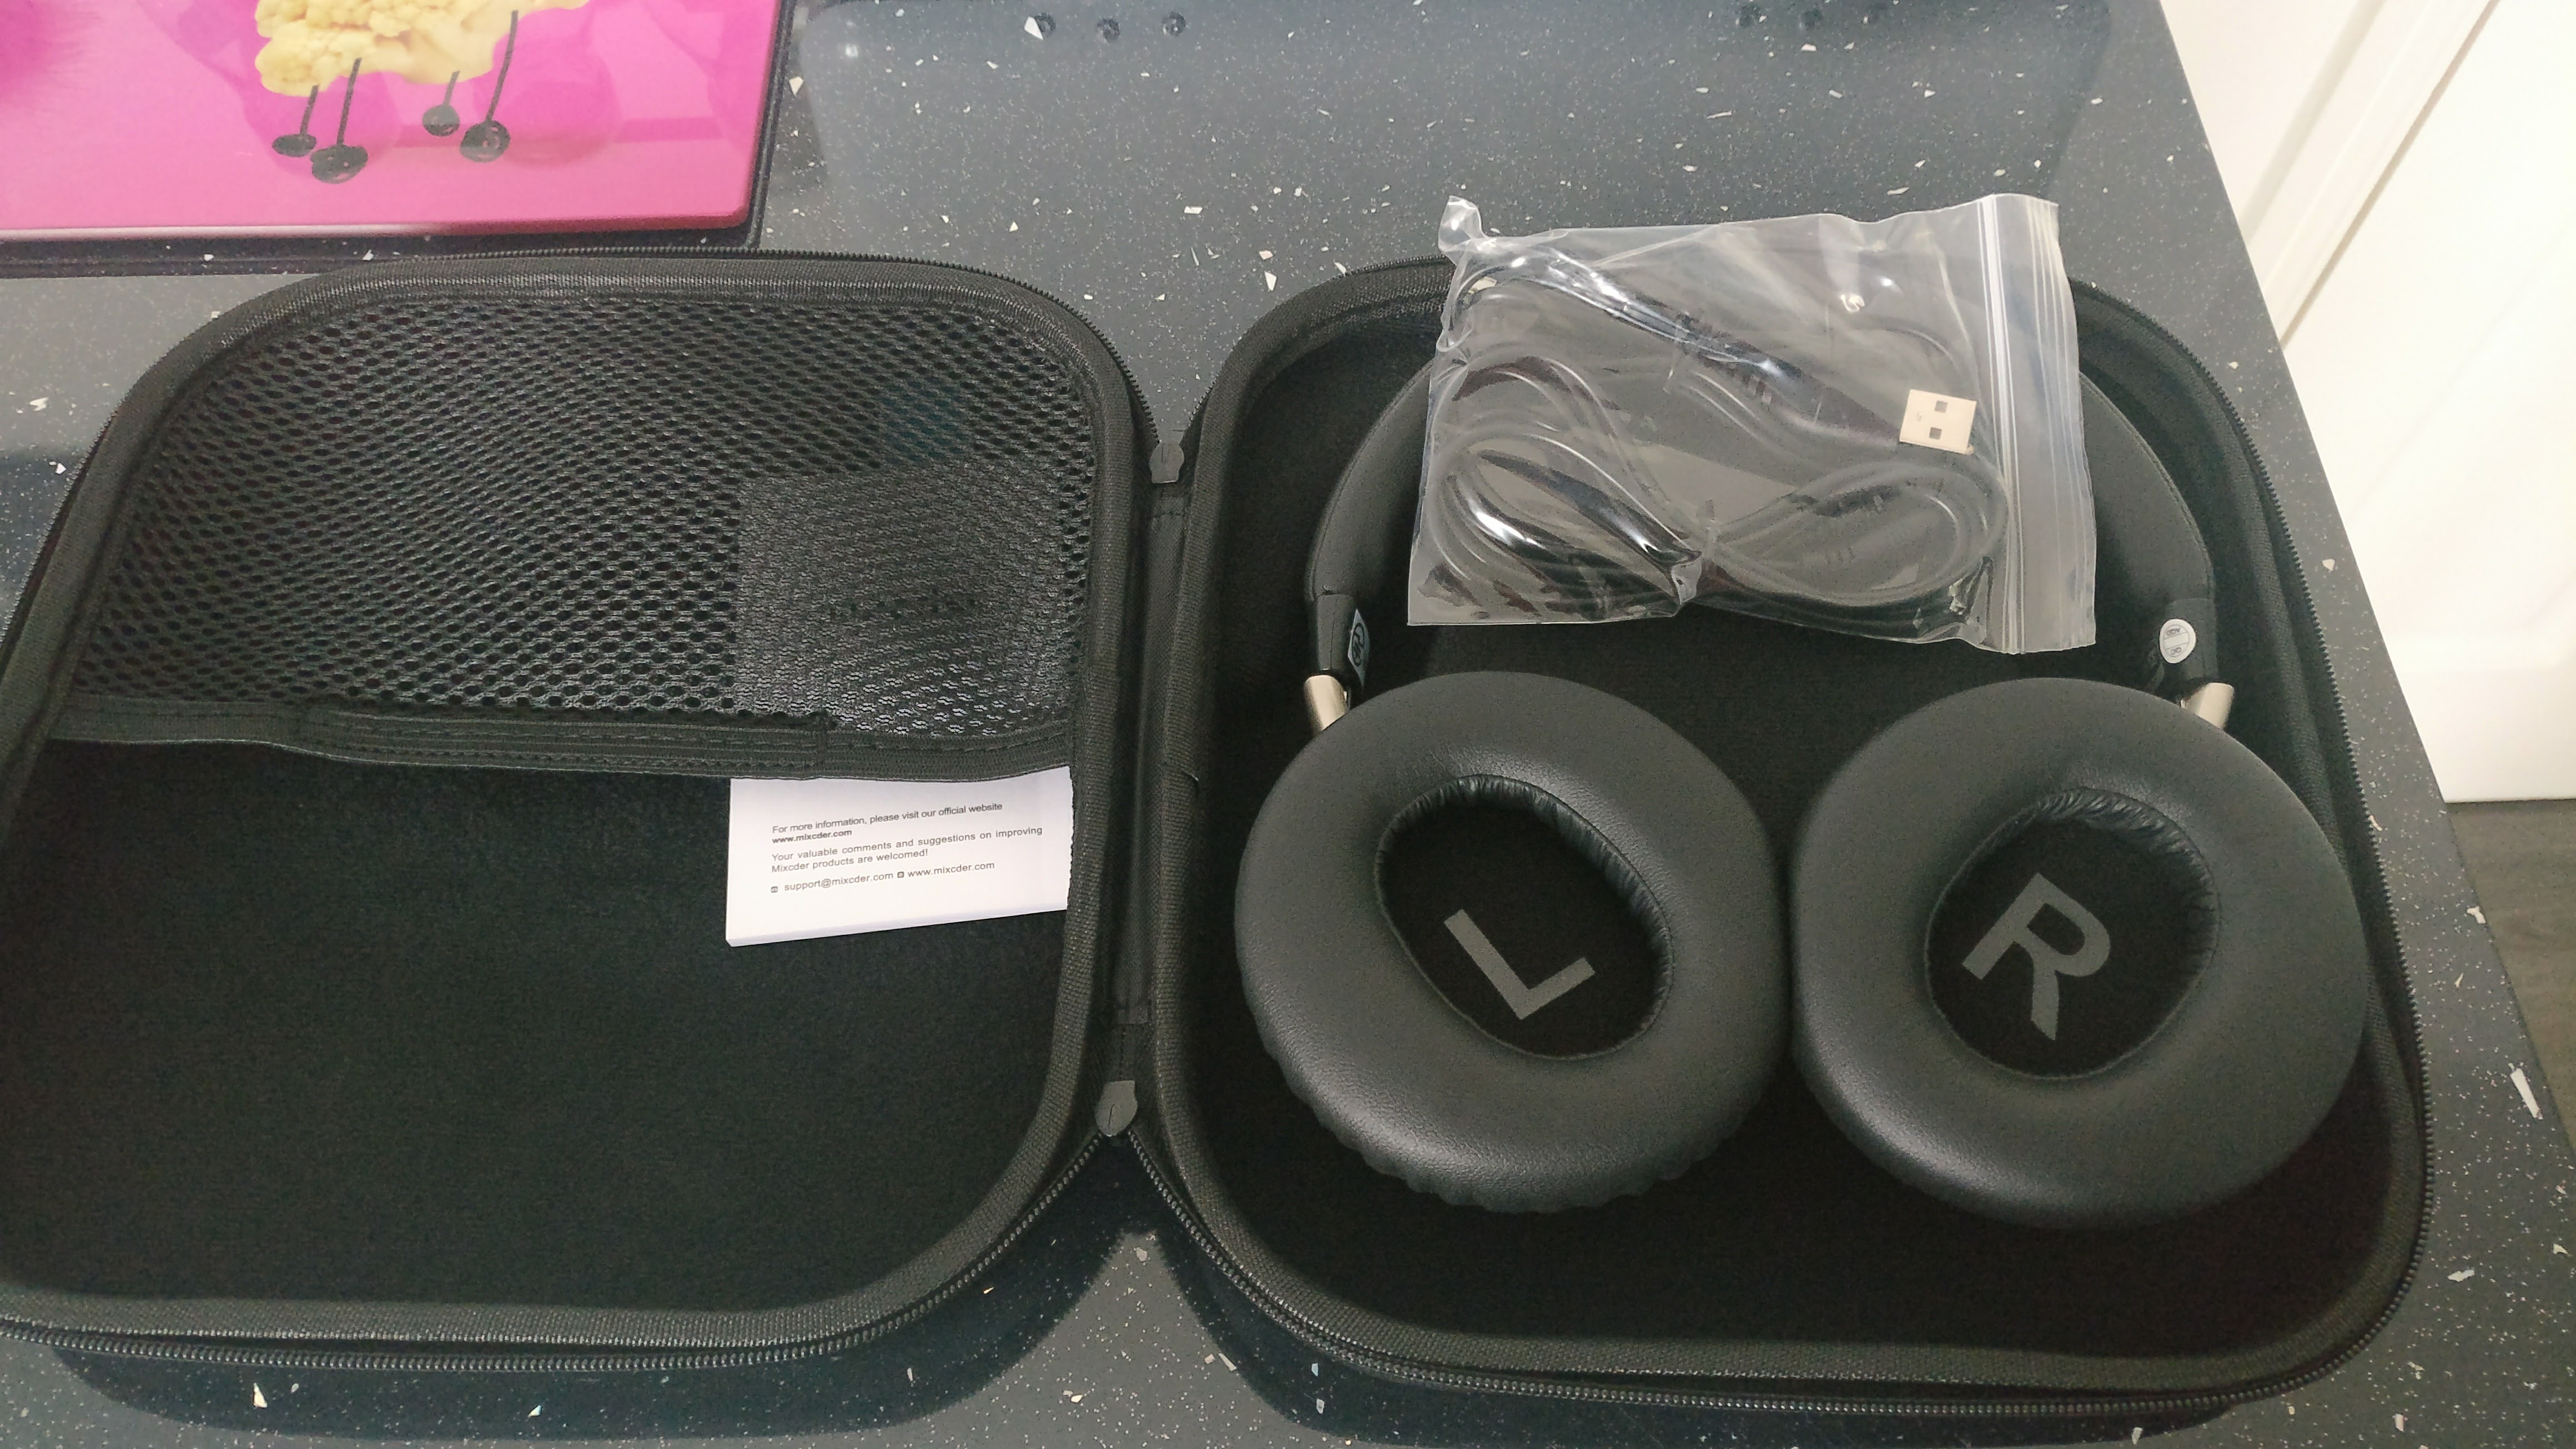 Mixcder MS301 wireless Bluetooth headphones   Review